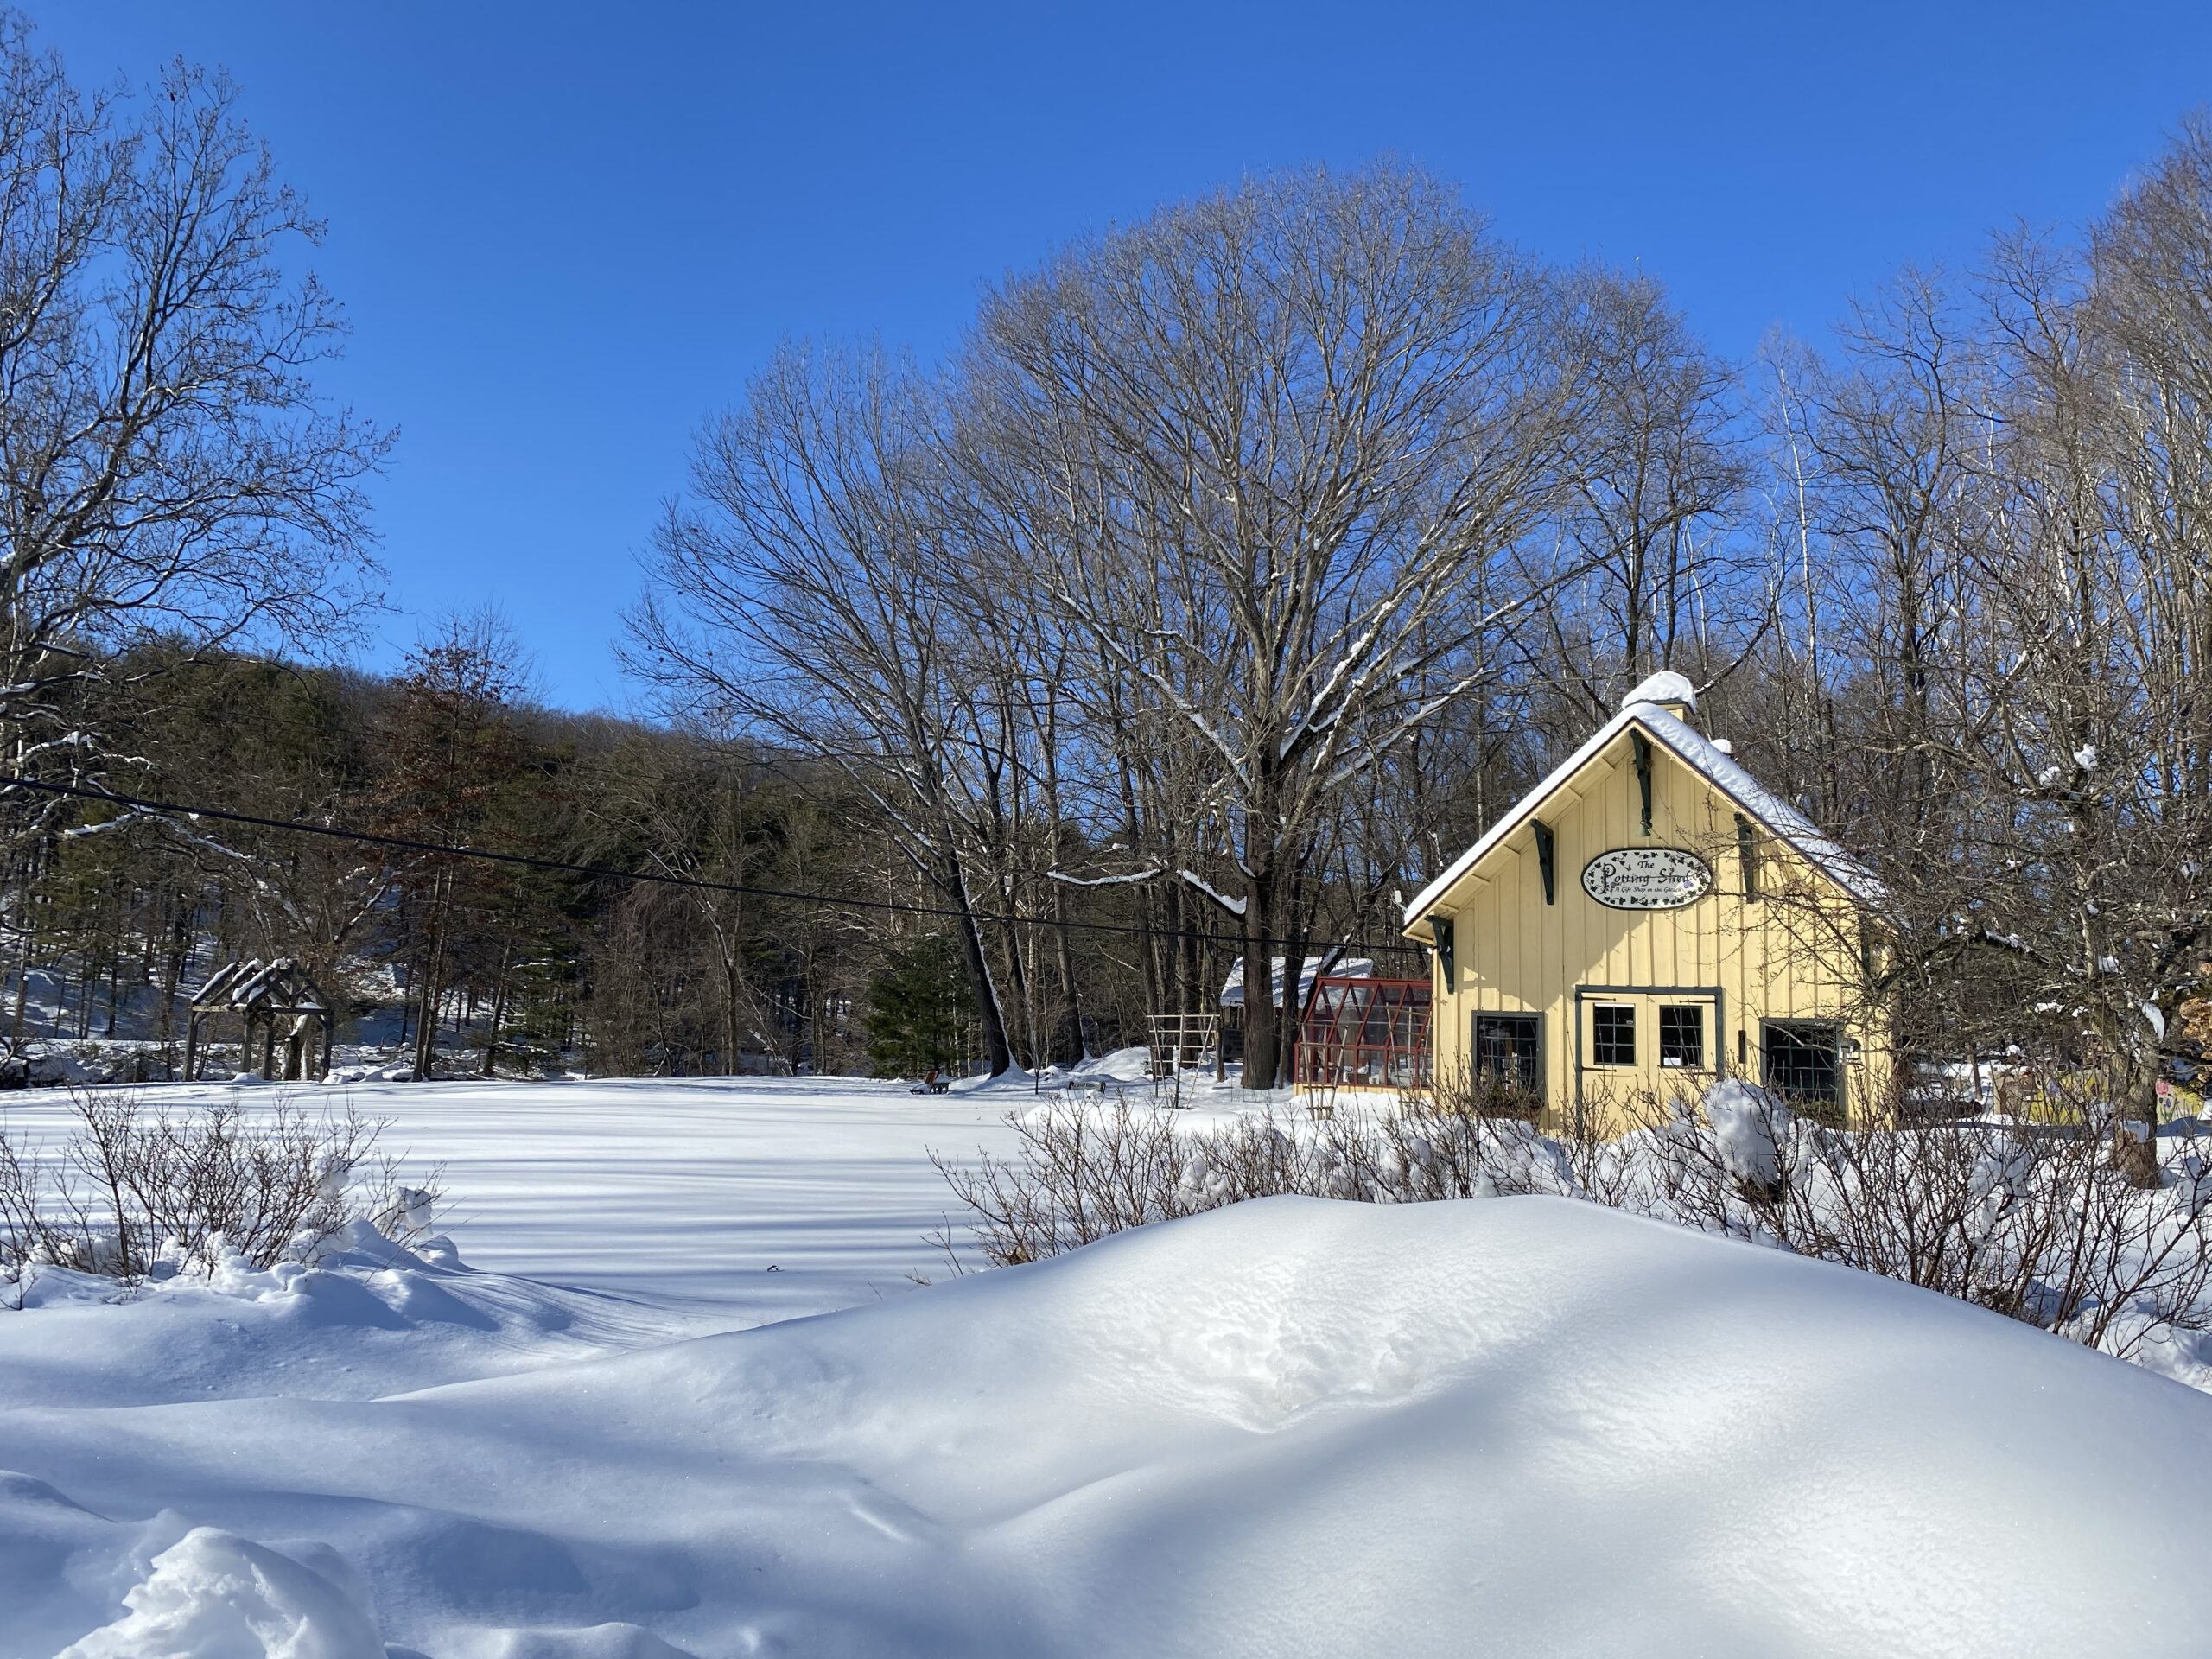 6 Things to Do in Winter at The Settlers Inn